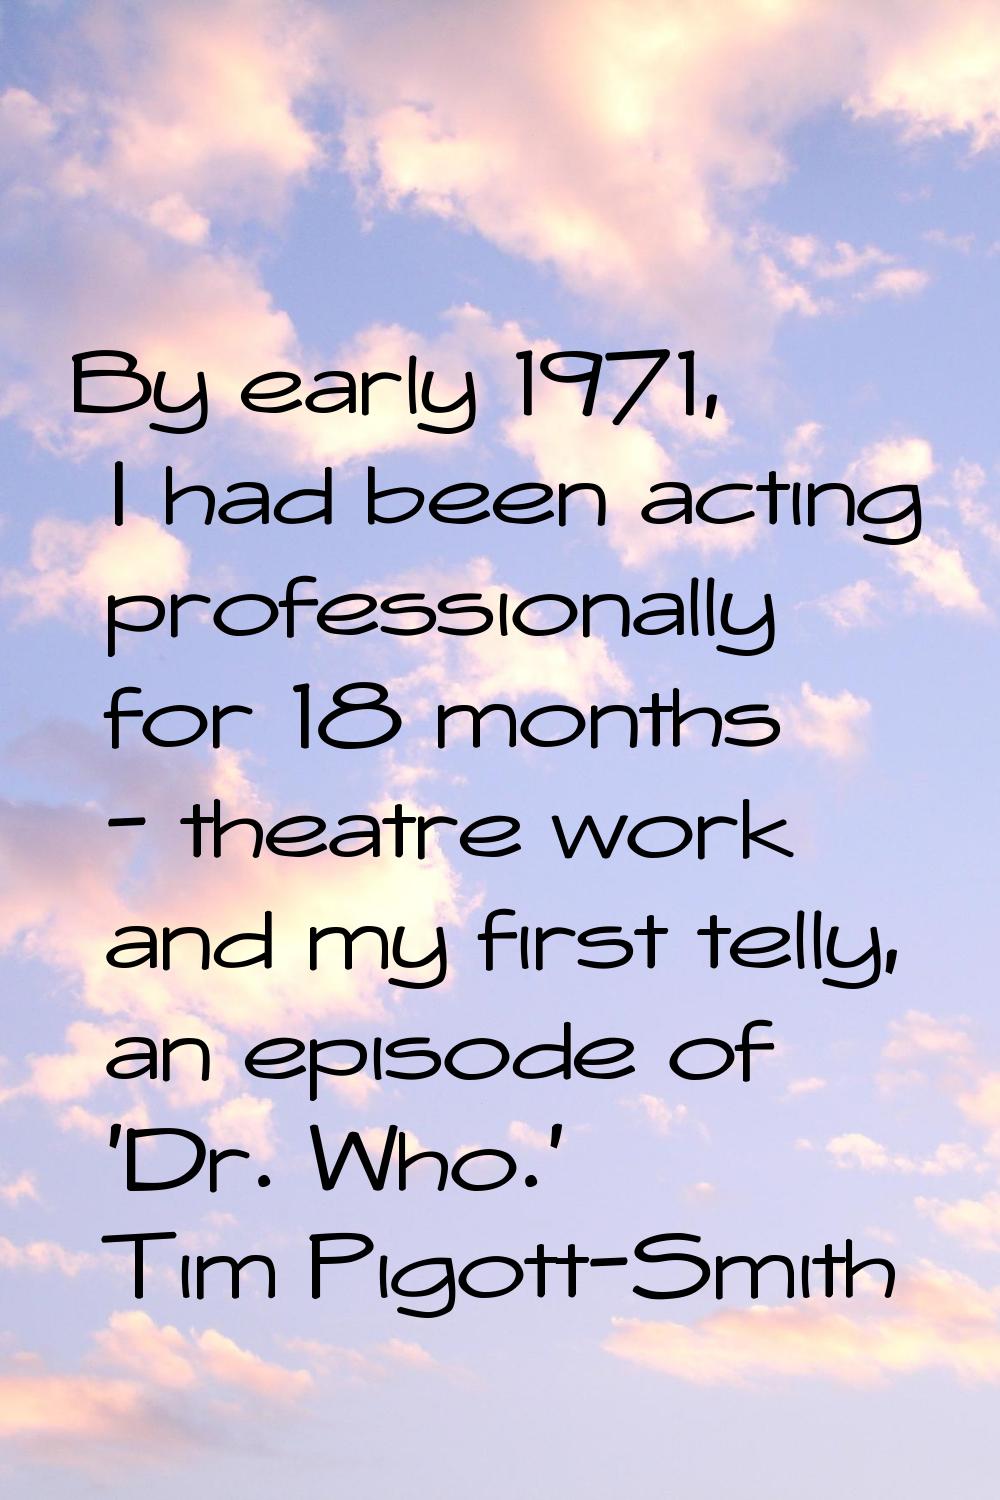 By early 1971, I had been acting professionally for 18 months - theatre work and my first telly, an